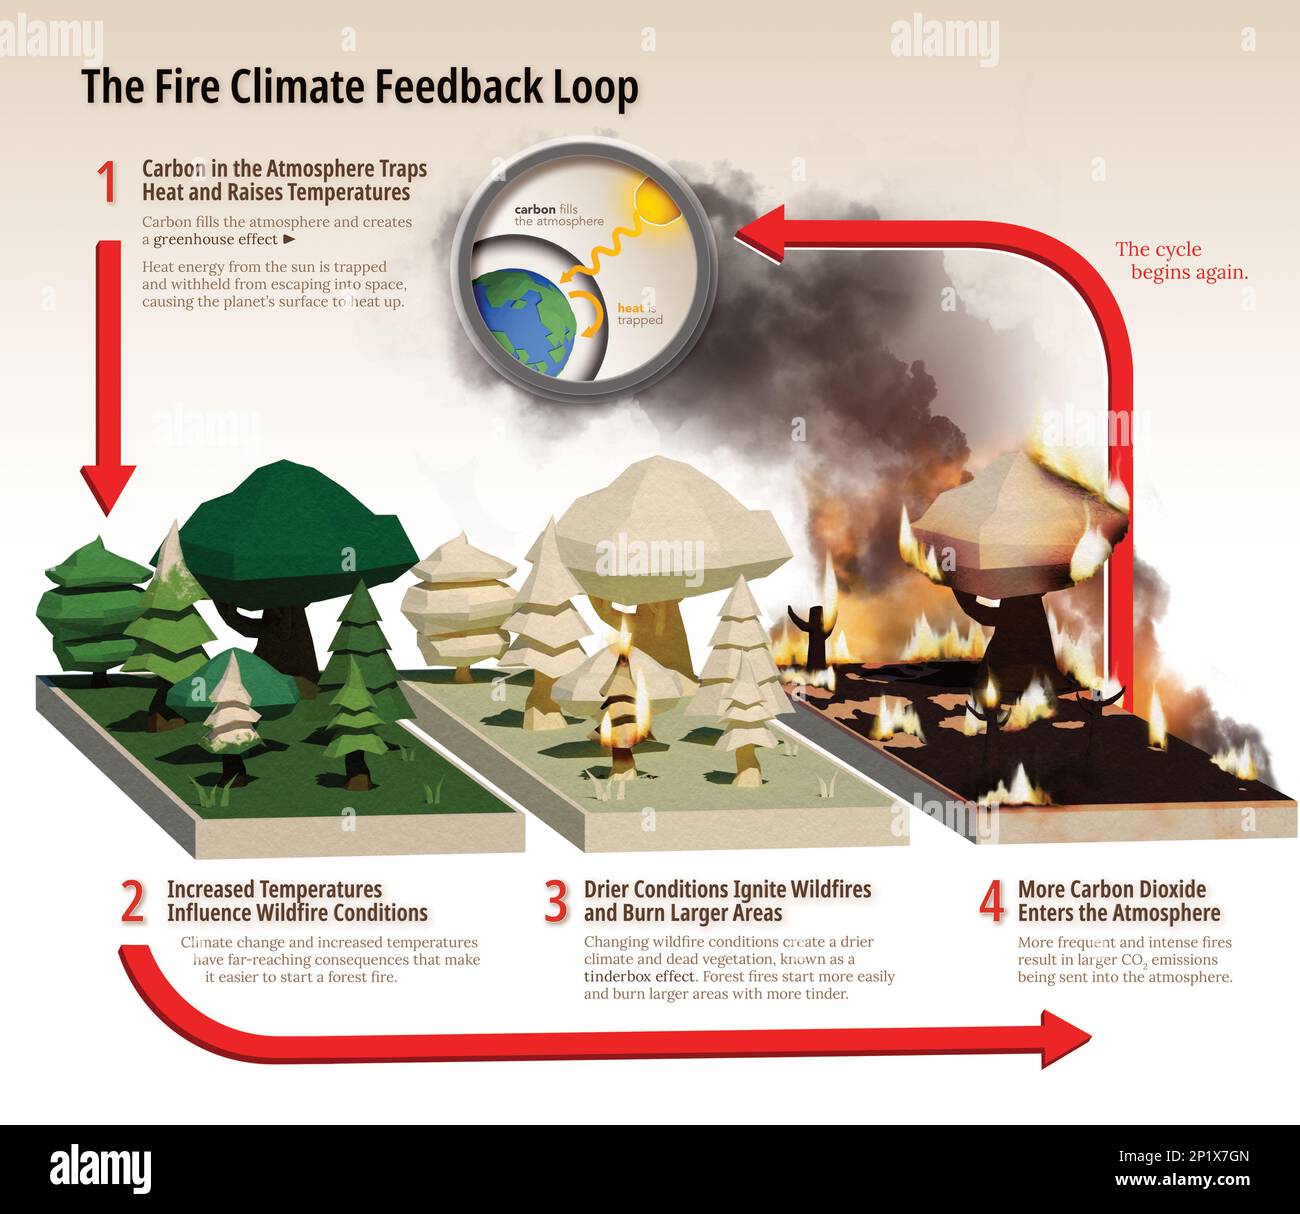 Fire and climate, illustration Stock Photo